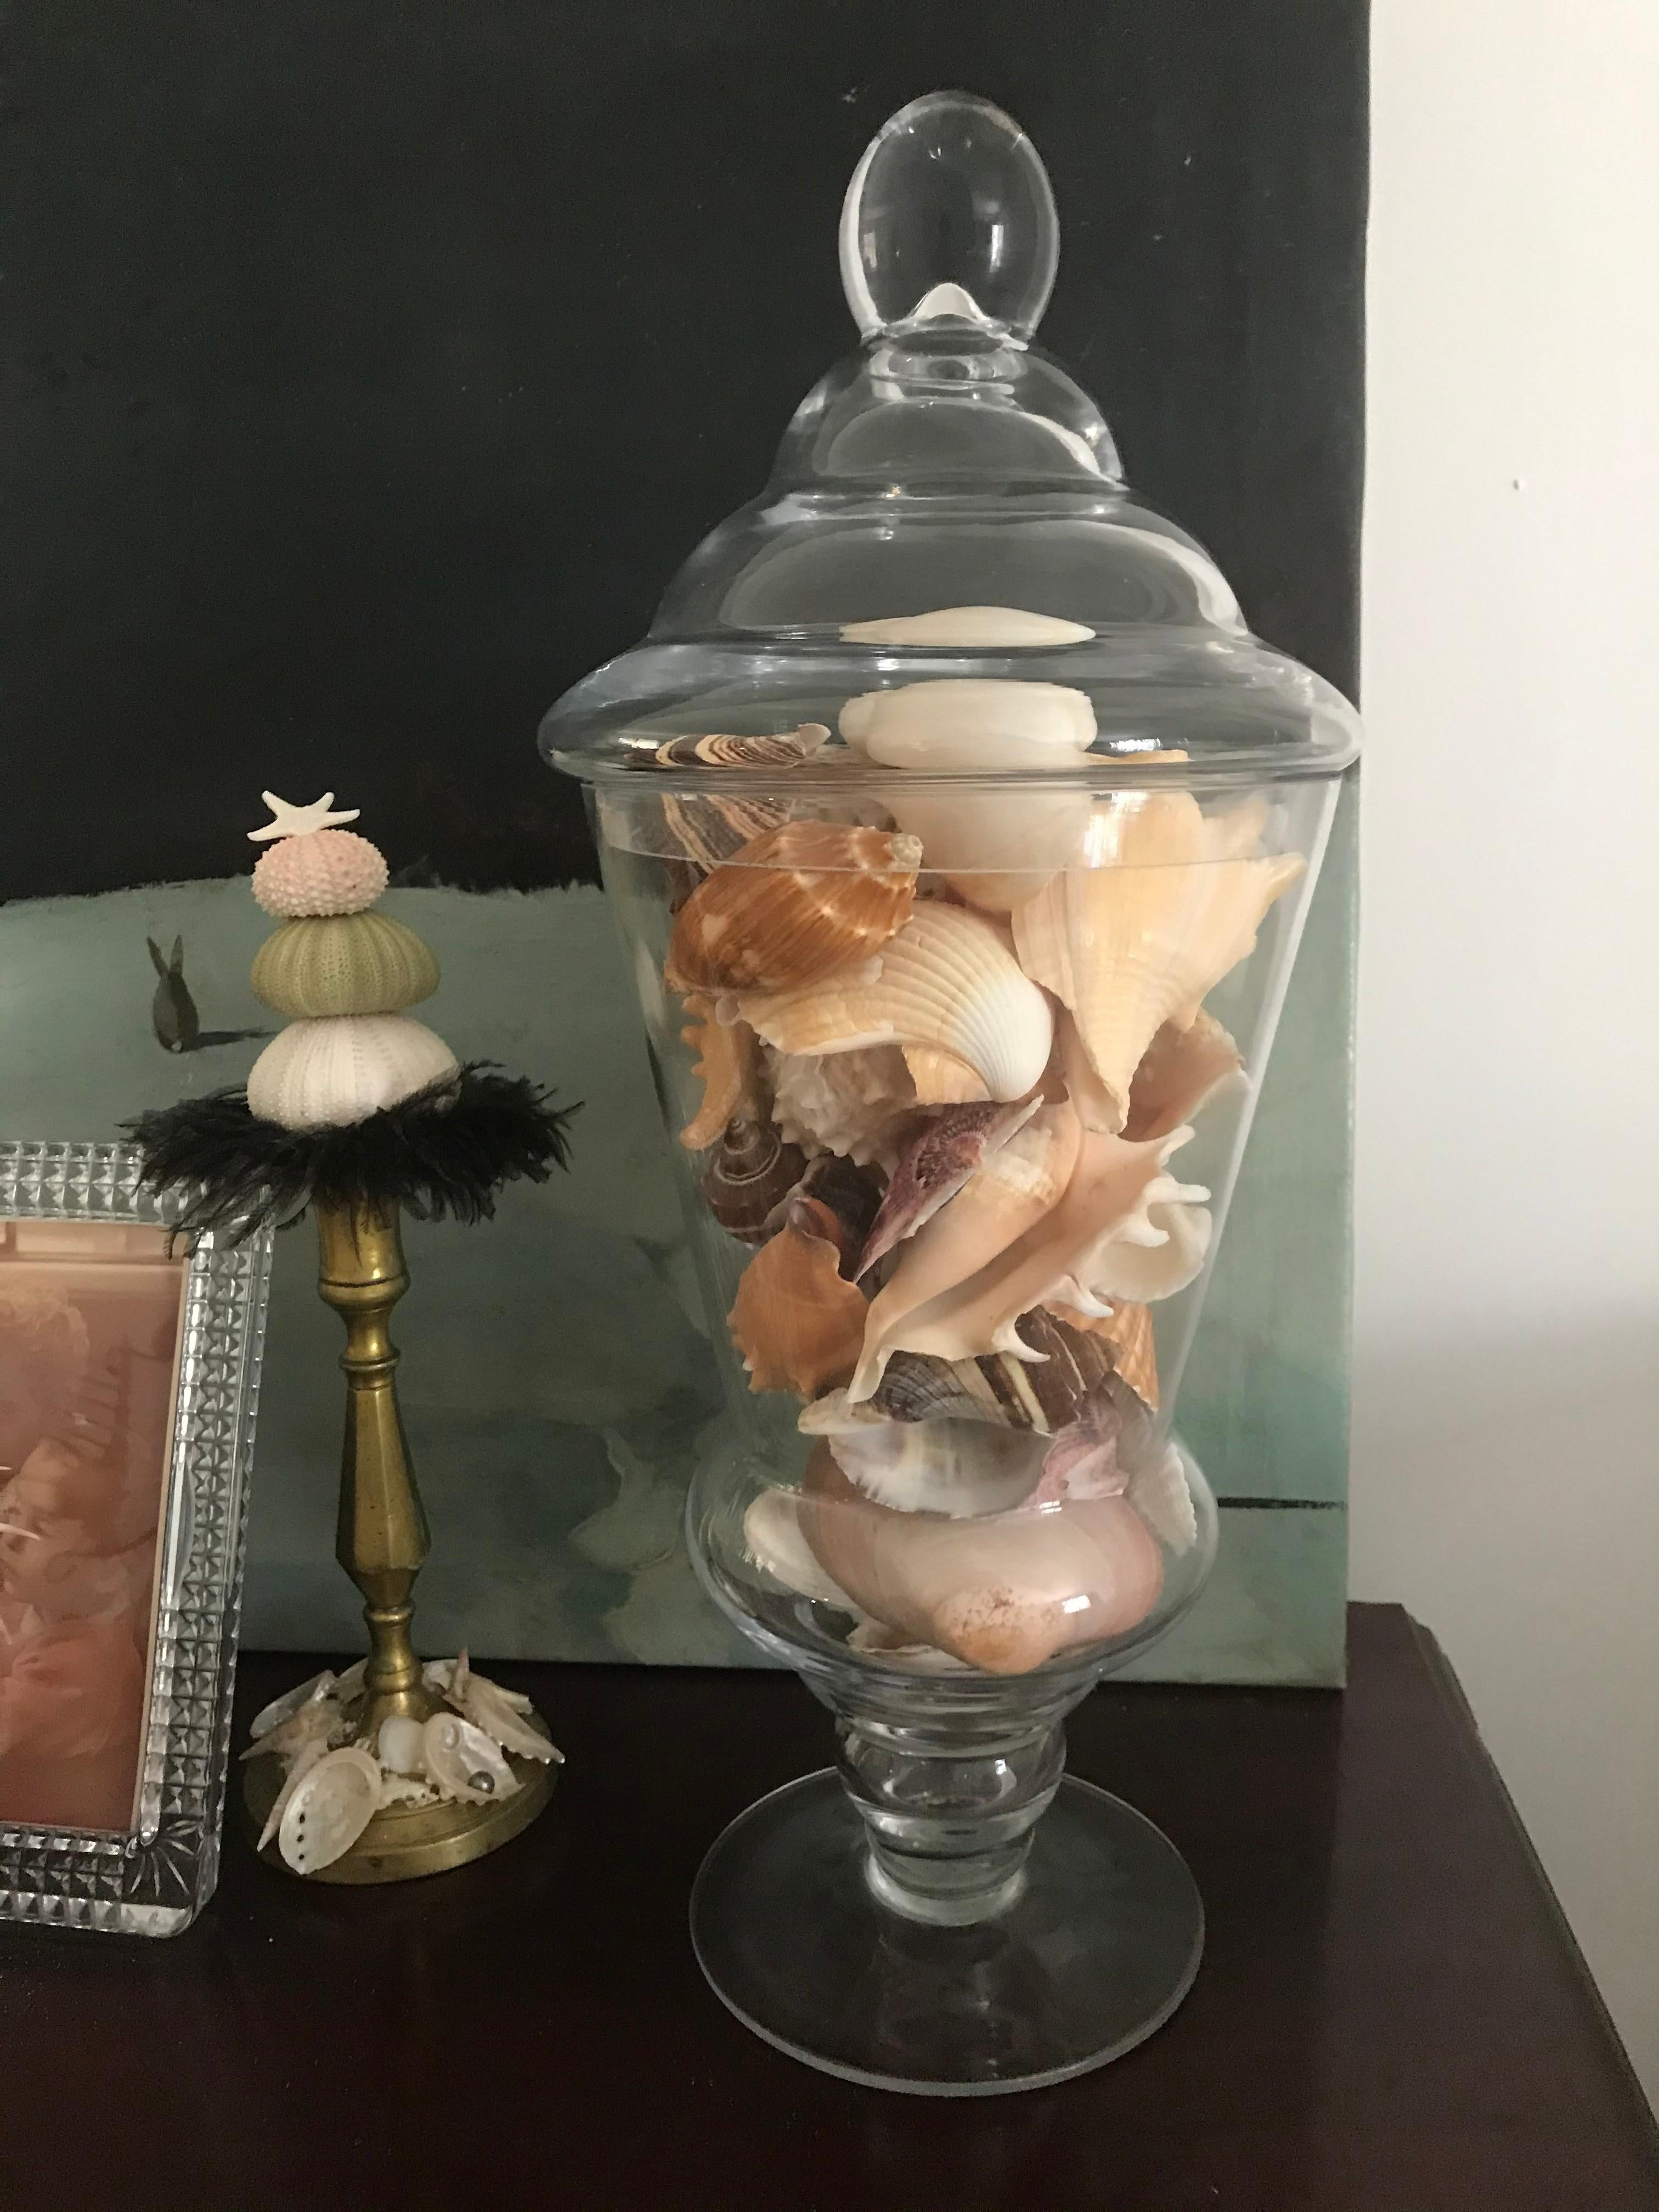  A selected Collection of middle size shells 3-5” in a glass vase with cover.16”